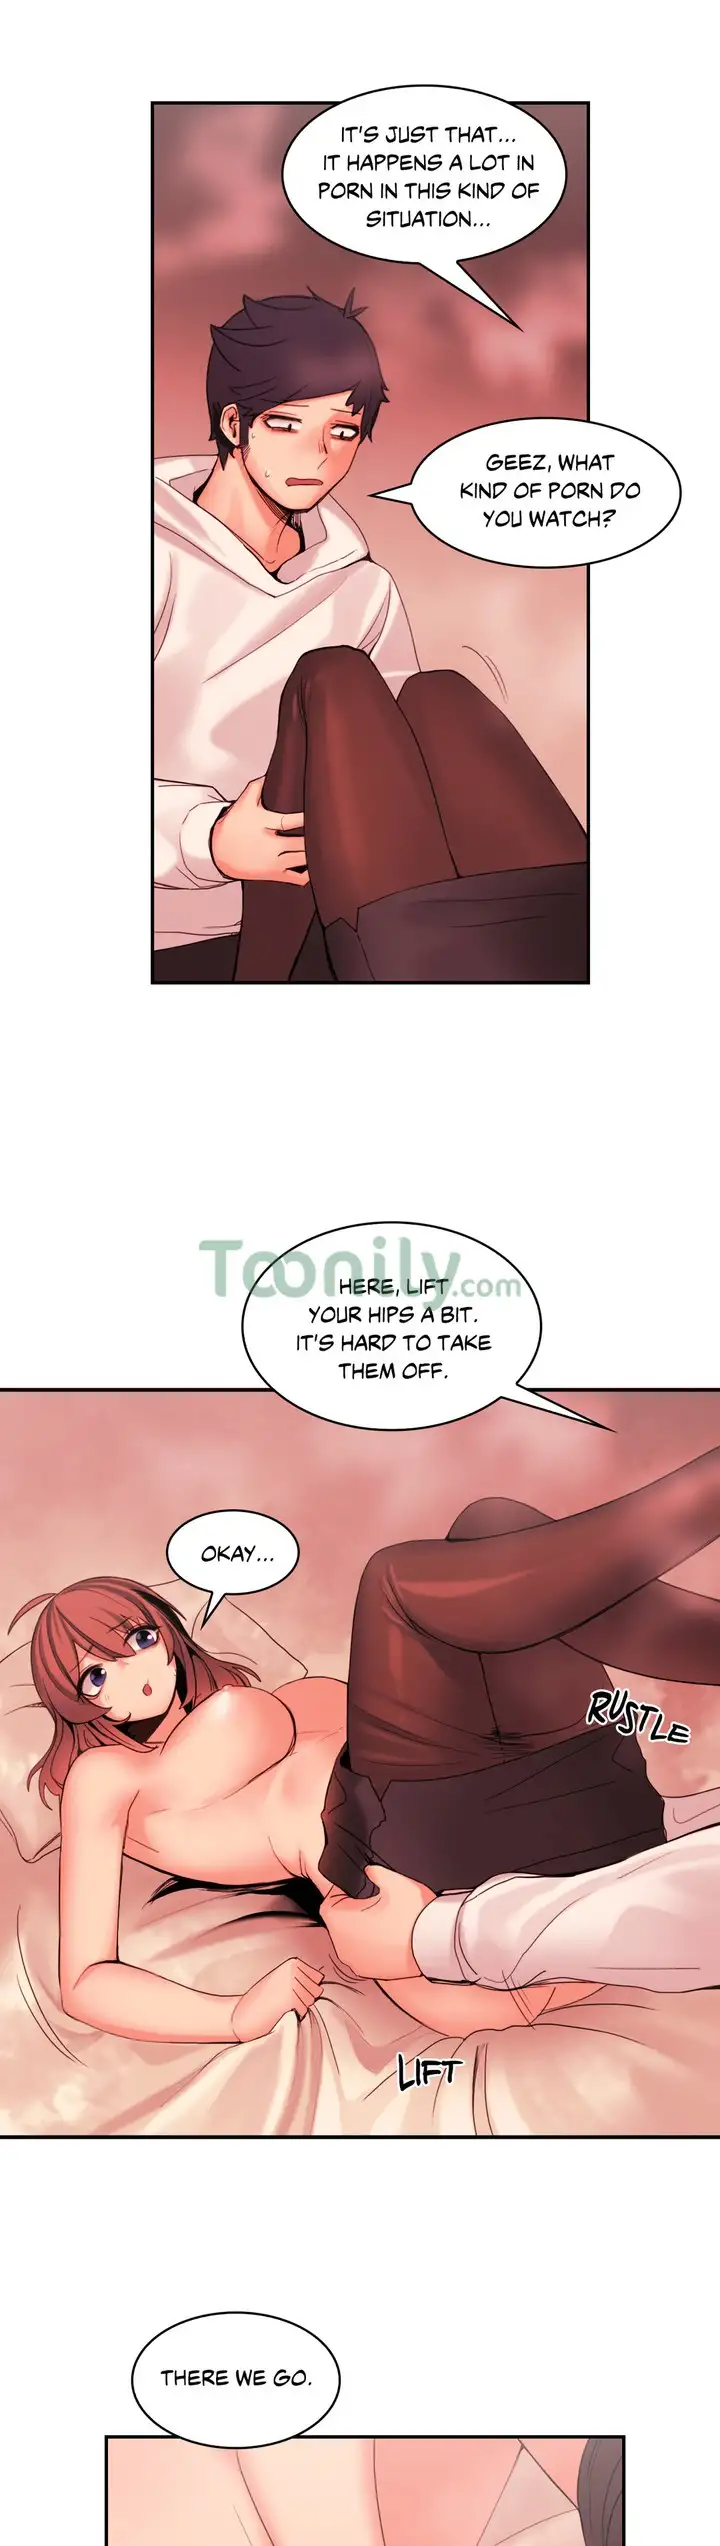 The Girl That Got Stuck in the Wall - Chapter 11 Page 6